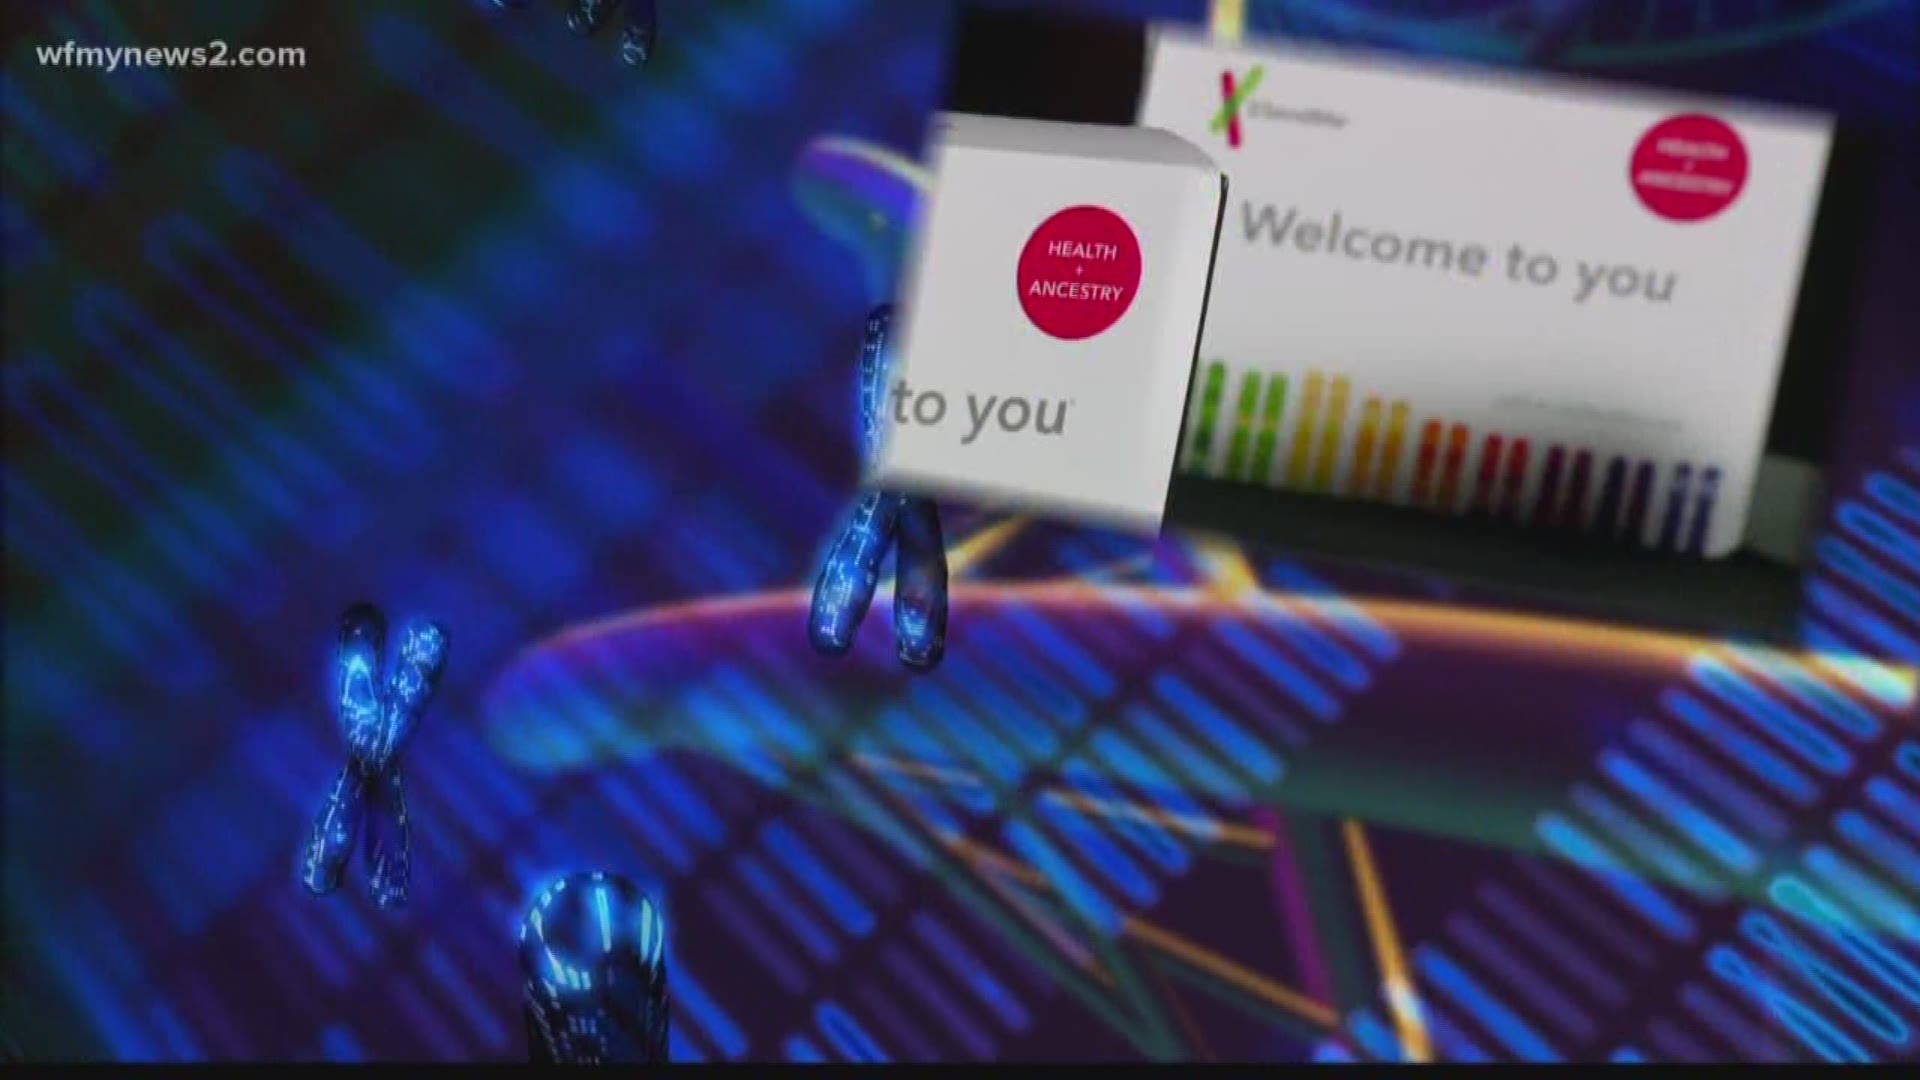 Home DNA kits test for risks of incurable diseases such as Alzheimer’s and Parkinson’s.